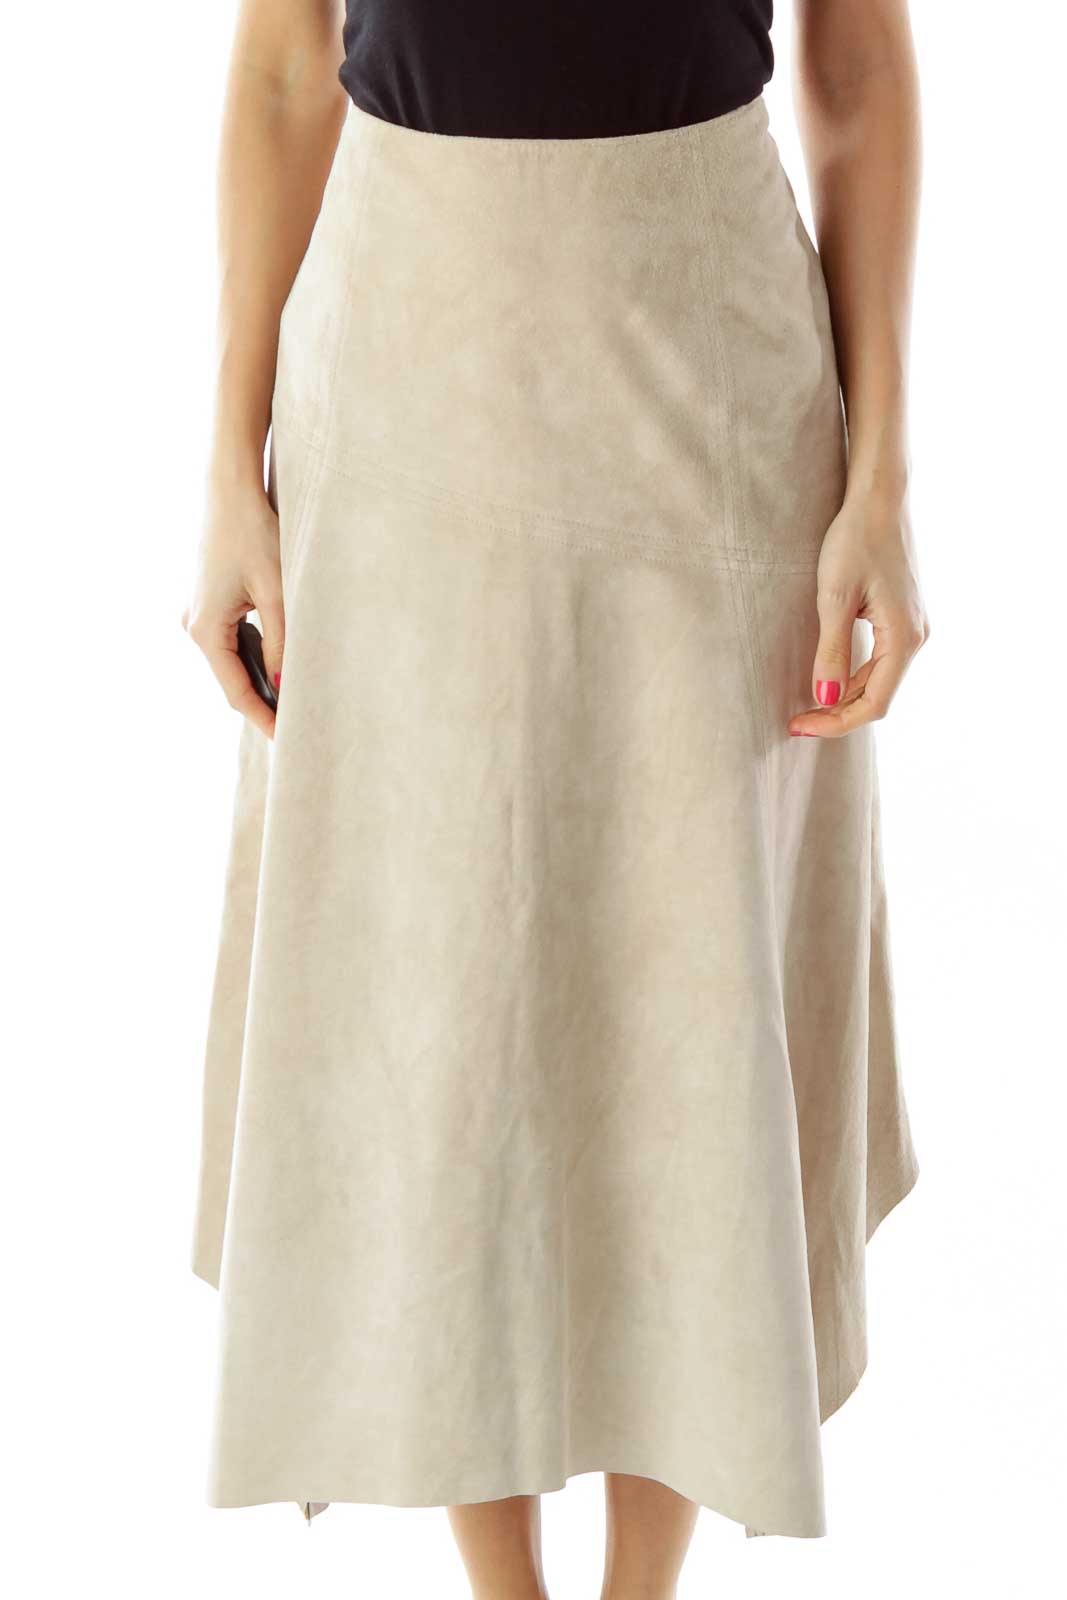 Beige High-Waisted Suede Skirt Front